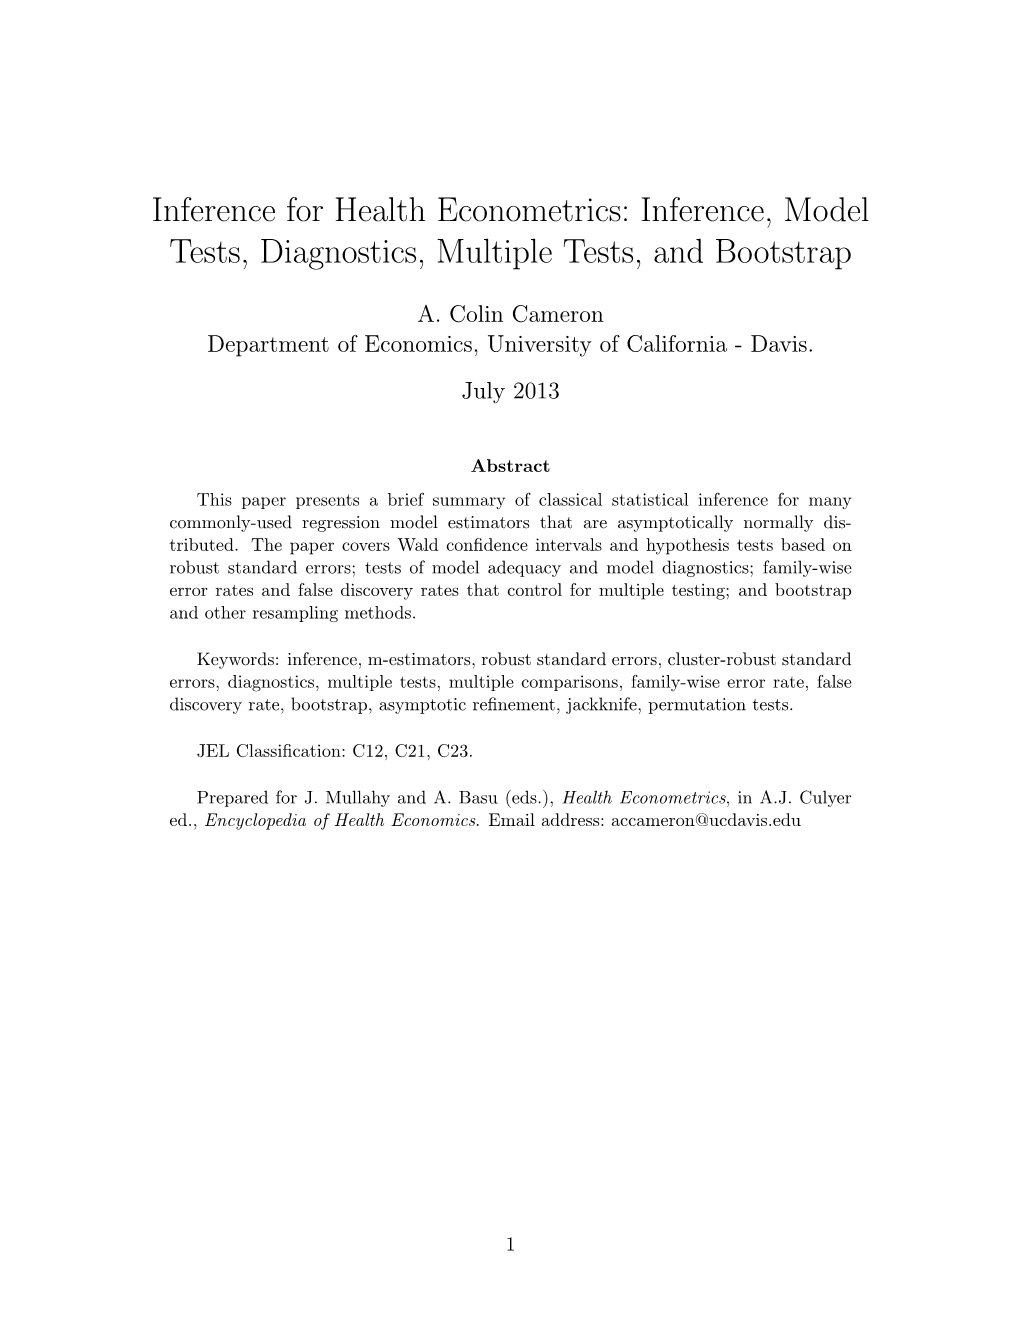 Inference for Health Econometrics: Inference, Model Tests, Diagnostics, Multiple Tests, and Bootstrap